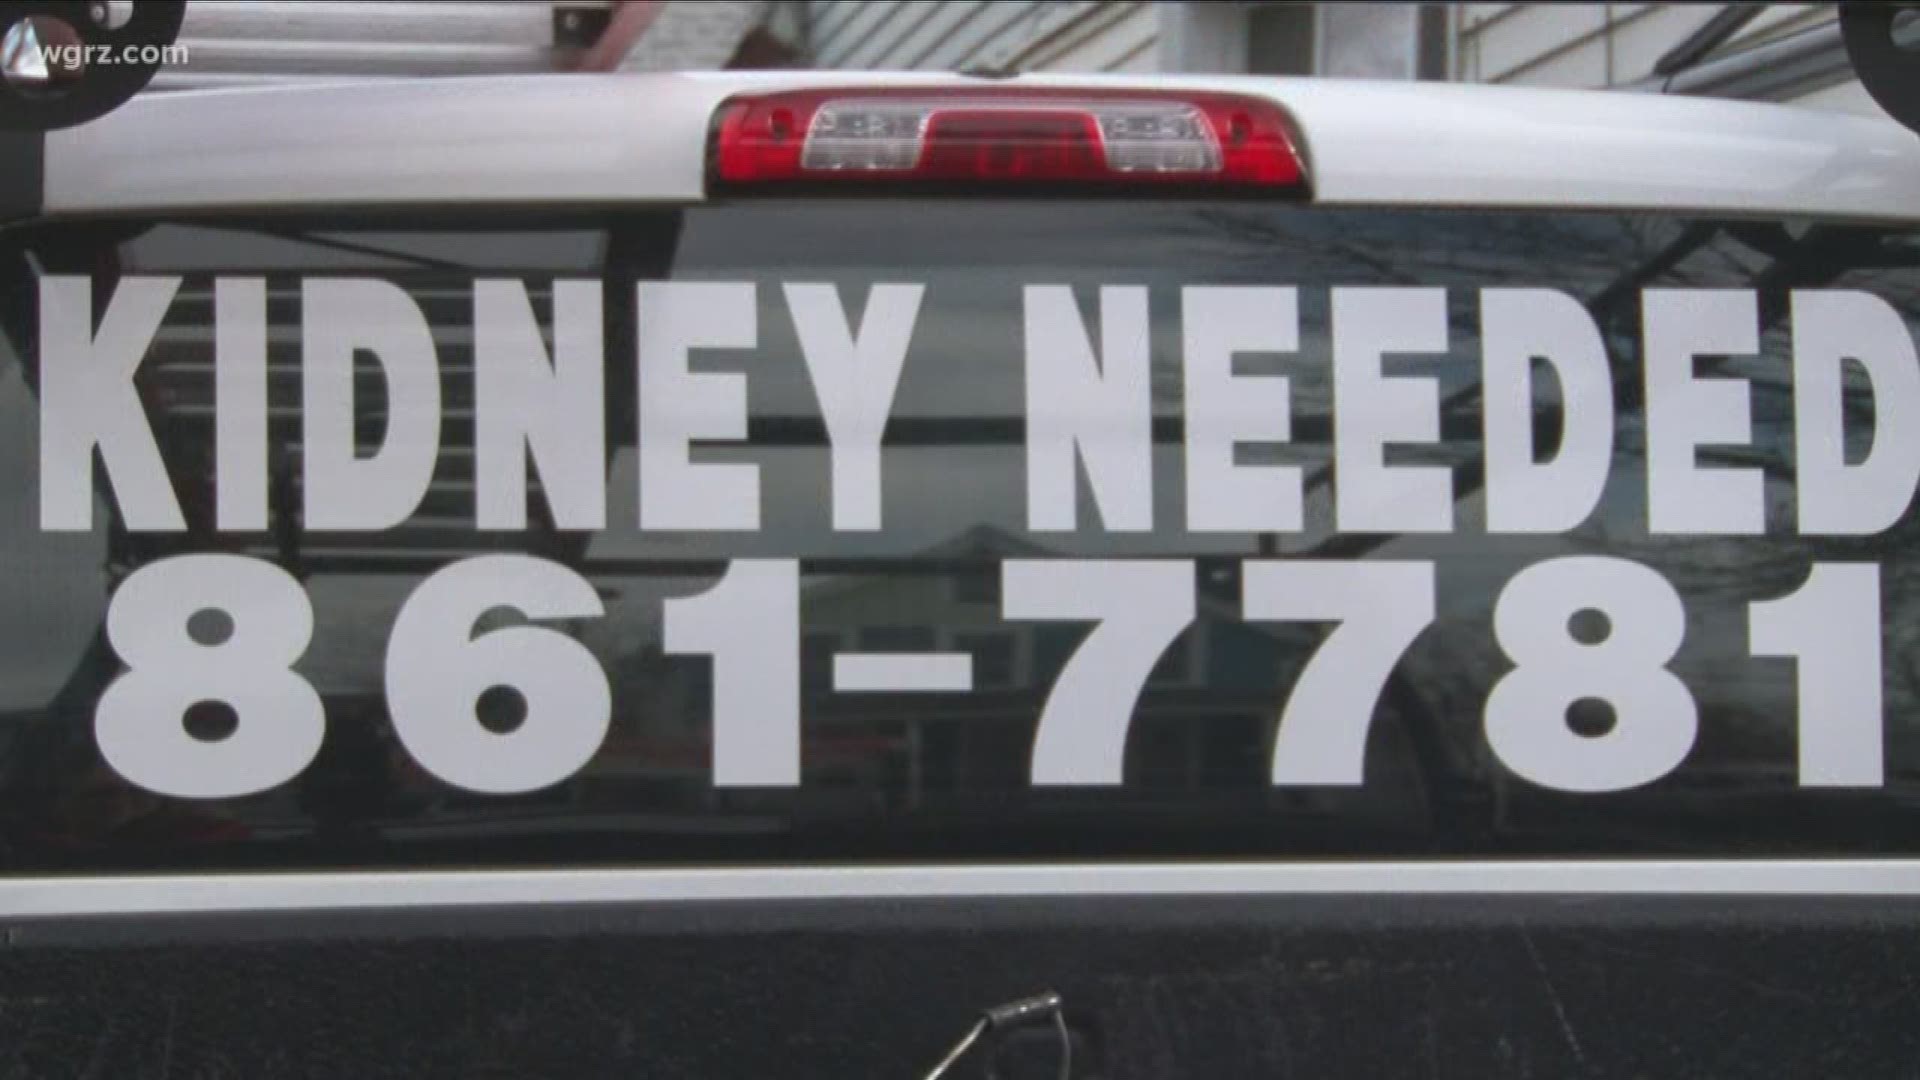 he decided to use his buisness to help him search for a donor. 
He put up advertisements on the back of three of his work cars... which say "kidney needed."